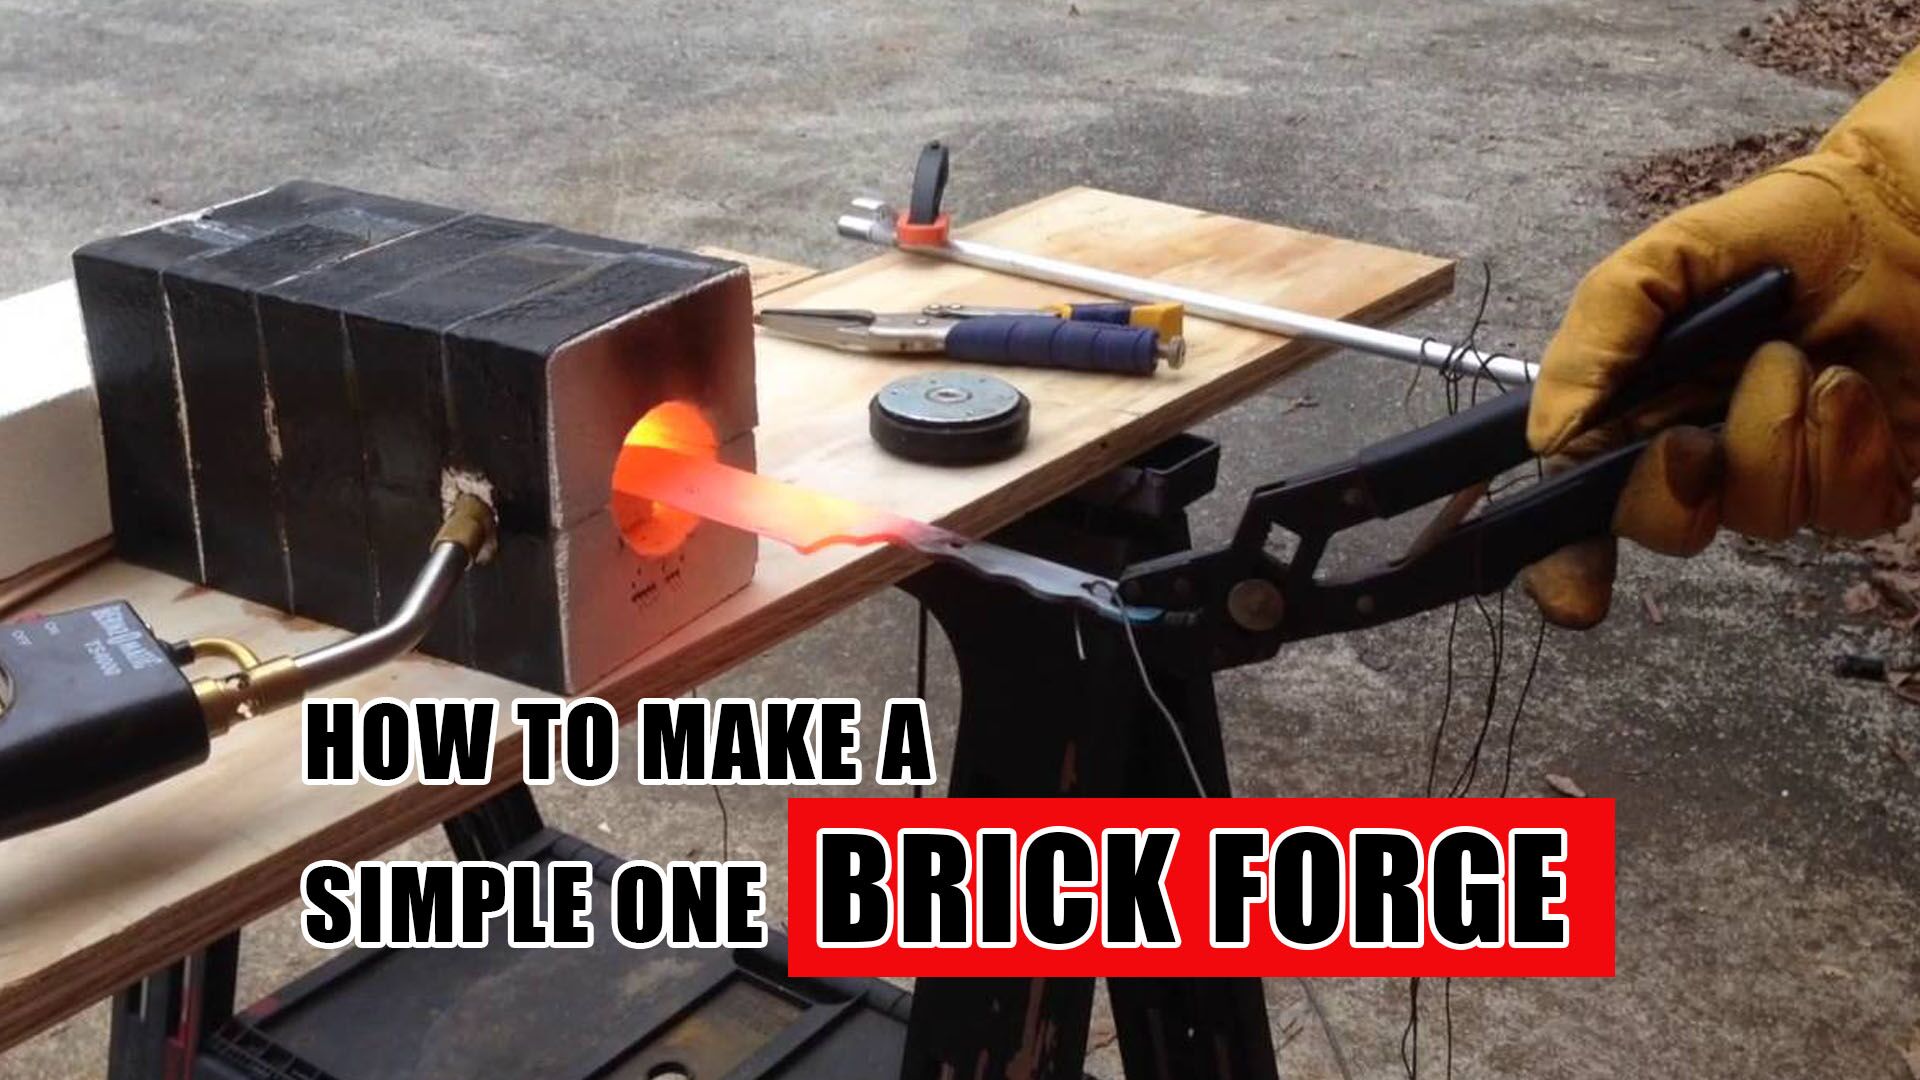 How to Make a Simple One Brick Forge